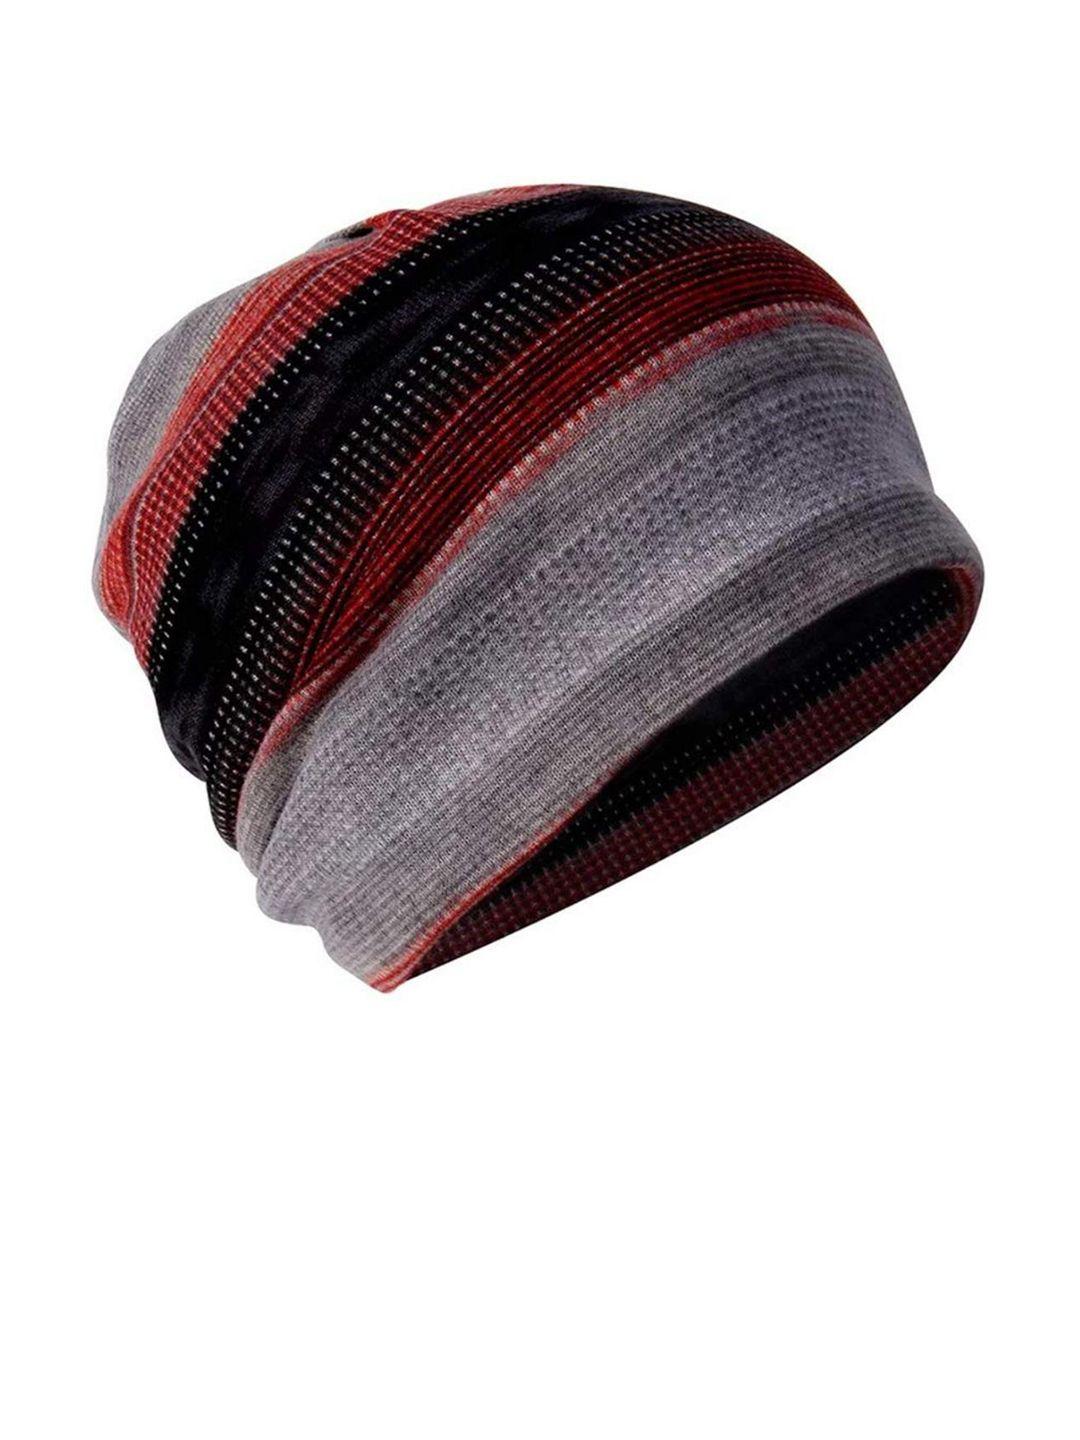 youstylo unisex red & grey printed beanie